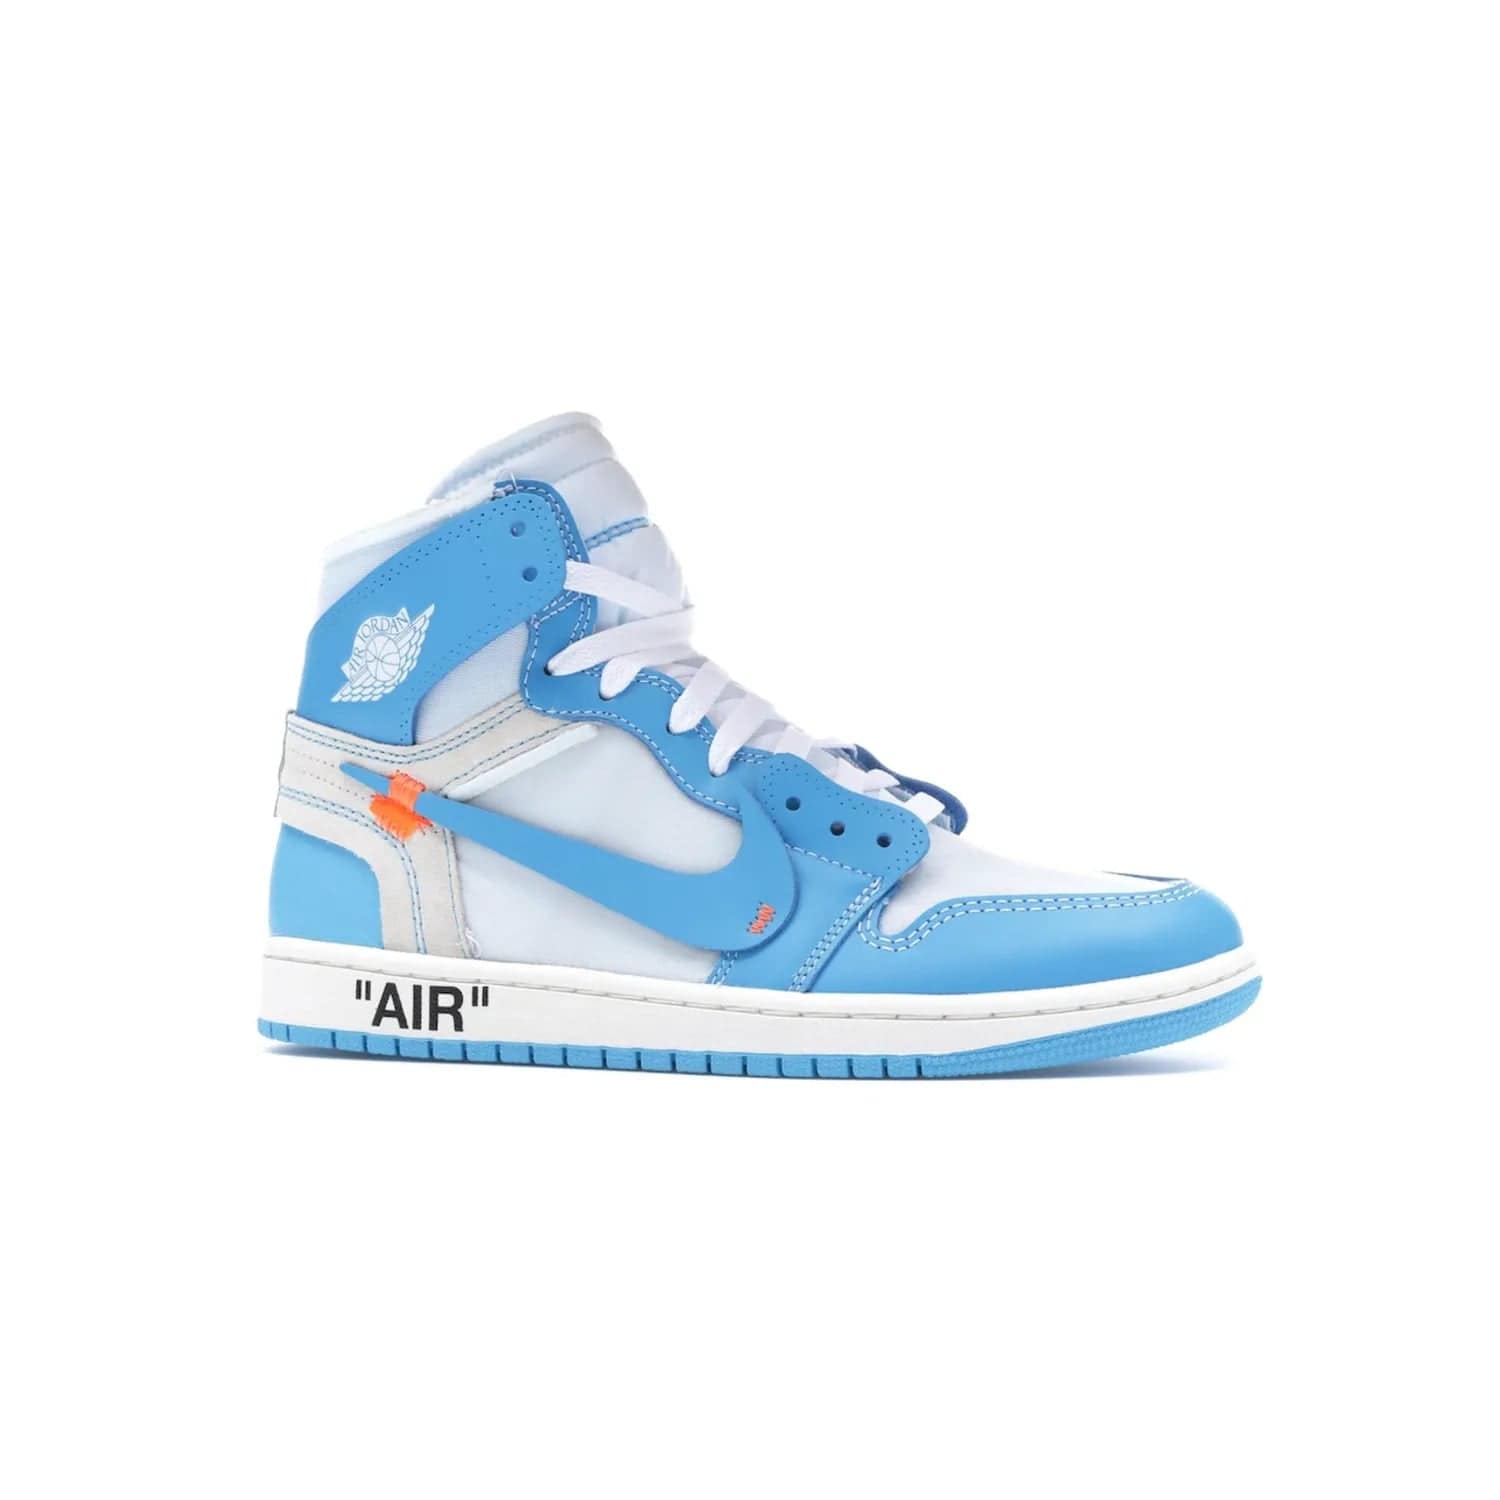 Jordan 1 Retro High Off-White University Blue - Image 3 - Only at www.BallersClubKickz.com - Classic Jordan 1 Retro High "Off-White UNC" sneakers meld style and comfort. Boasting deconstructed white and blue leather, Off-White detailing, and a white, dark powder blue and cone colorway, these sneakers are perfect for dressing up or down. Get the iconic Off-White Jordan 1's and upgrade your look.